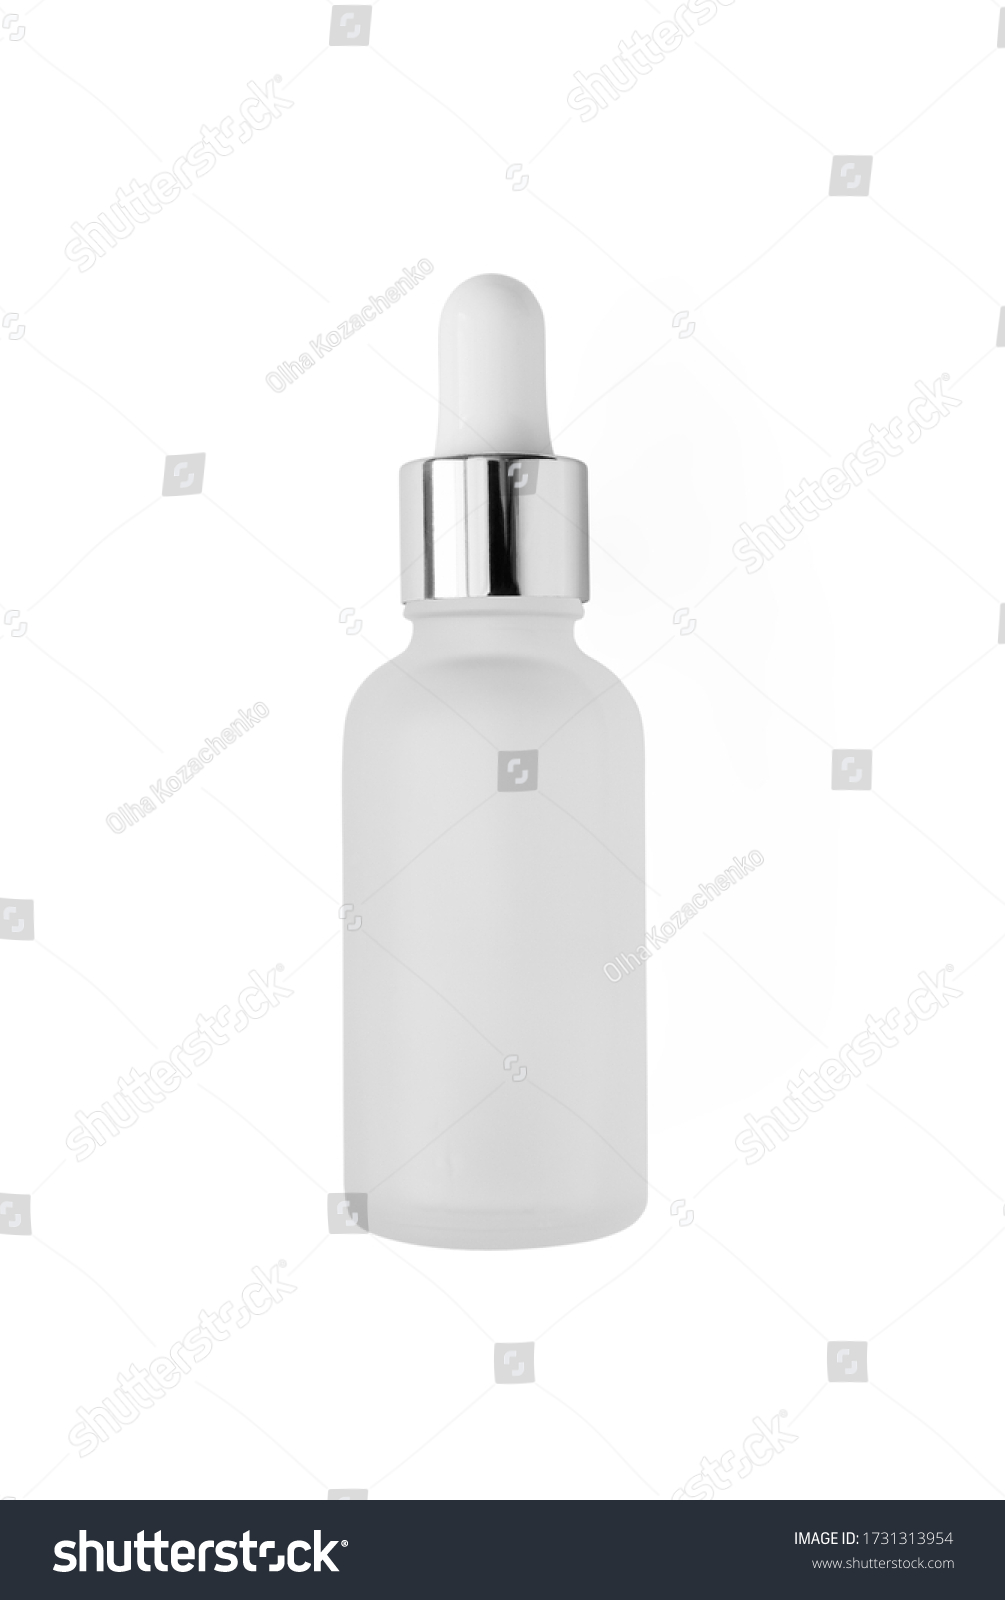 Frosted glass bottle with dropper with silver metallic cup isolated on white background, top view. Mockup cosmetic product